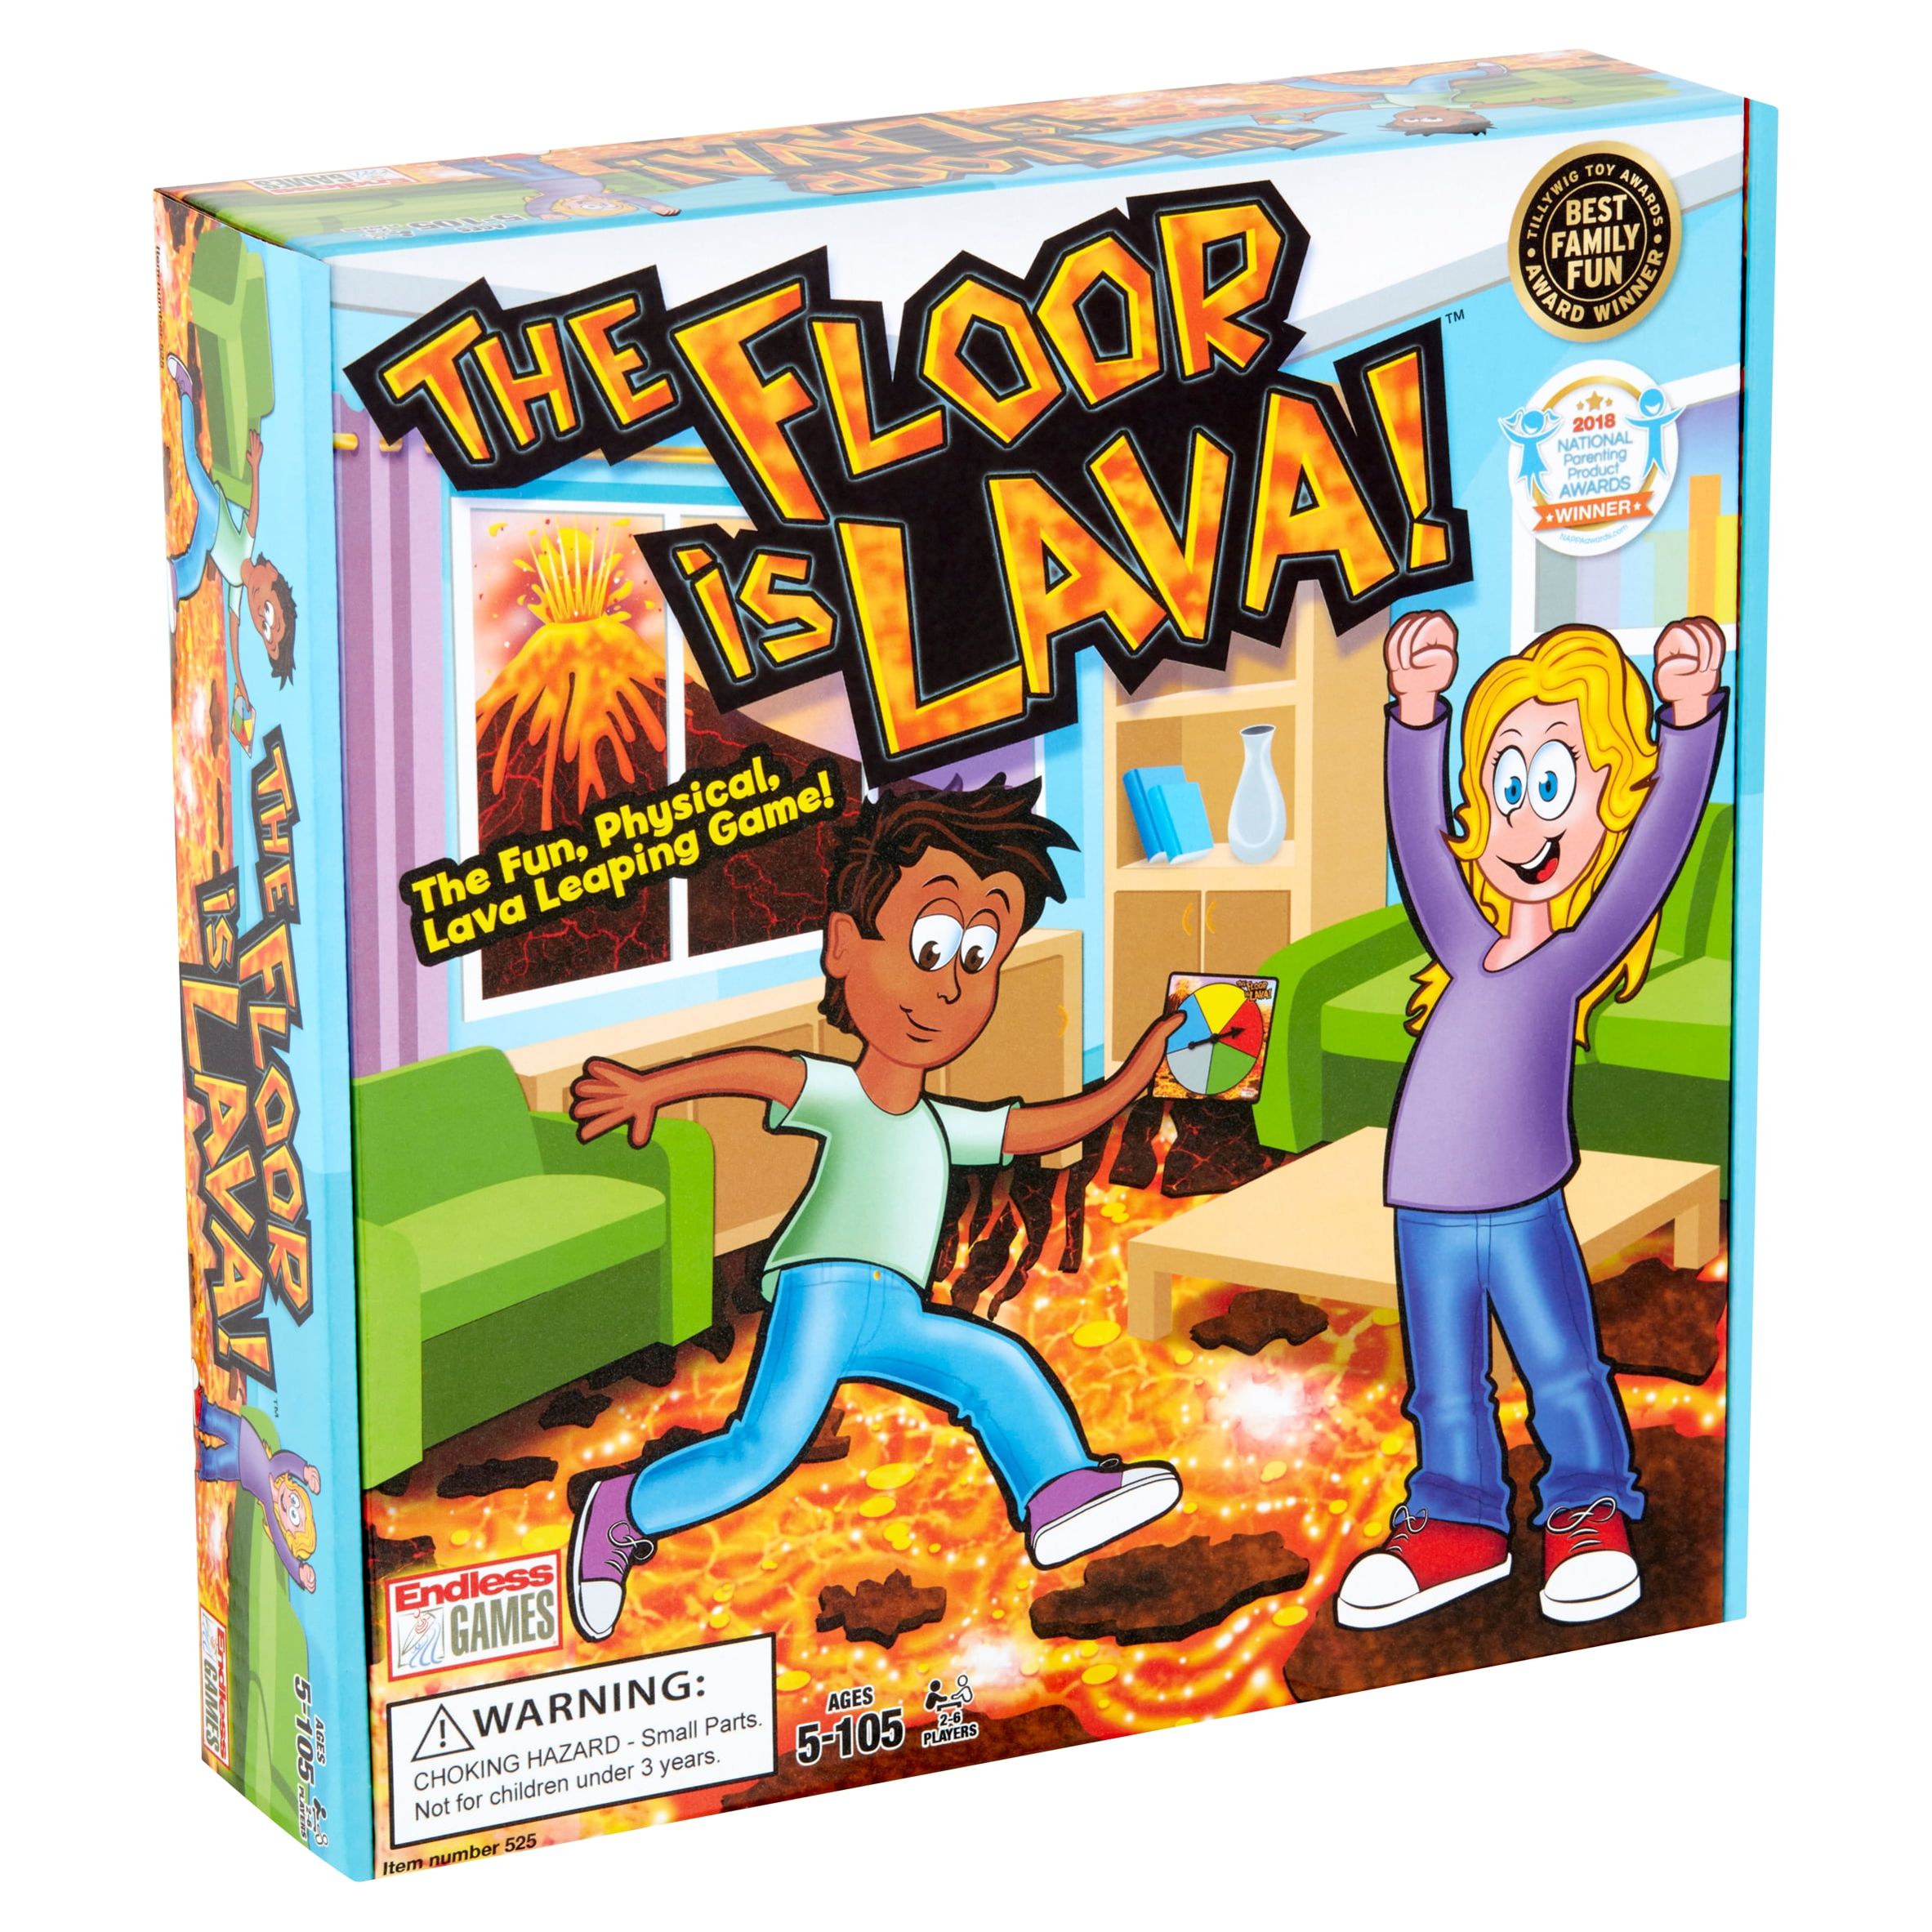 The Original The Floor Is Lava! Game by Endless Games - Interactive Game for Kids & Adults - image 1 of 10